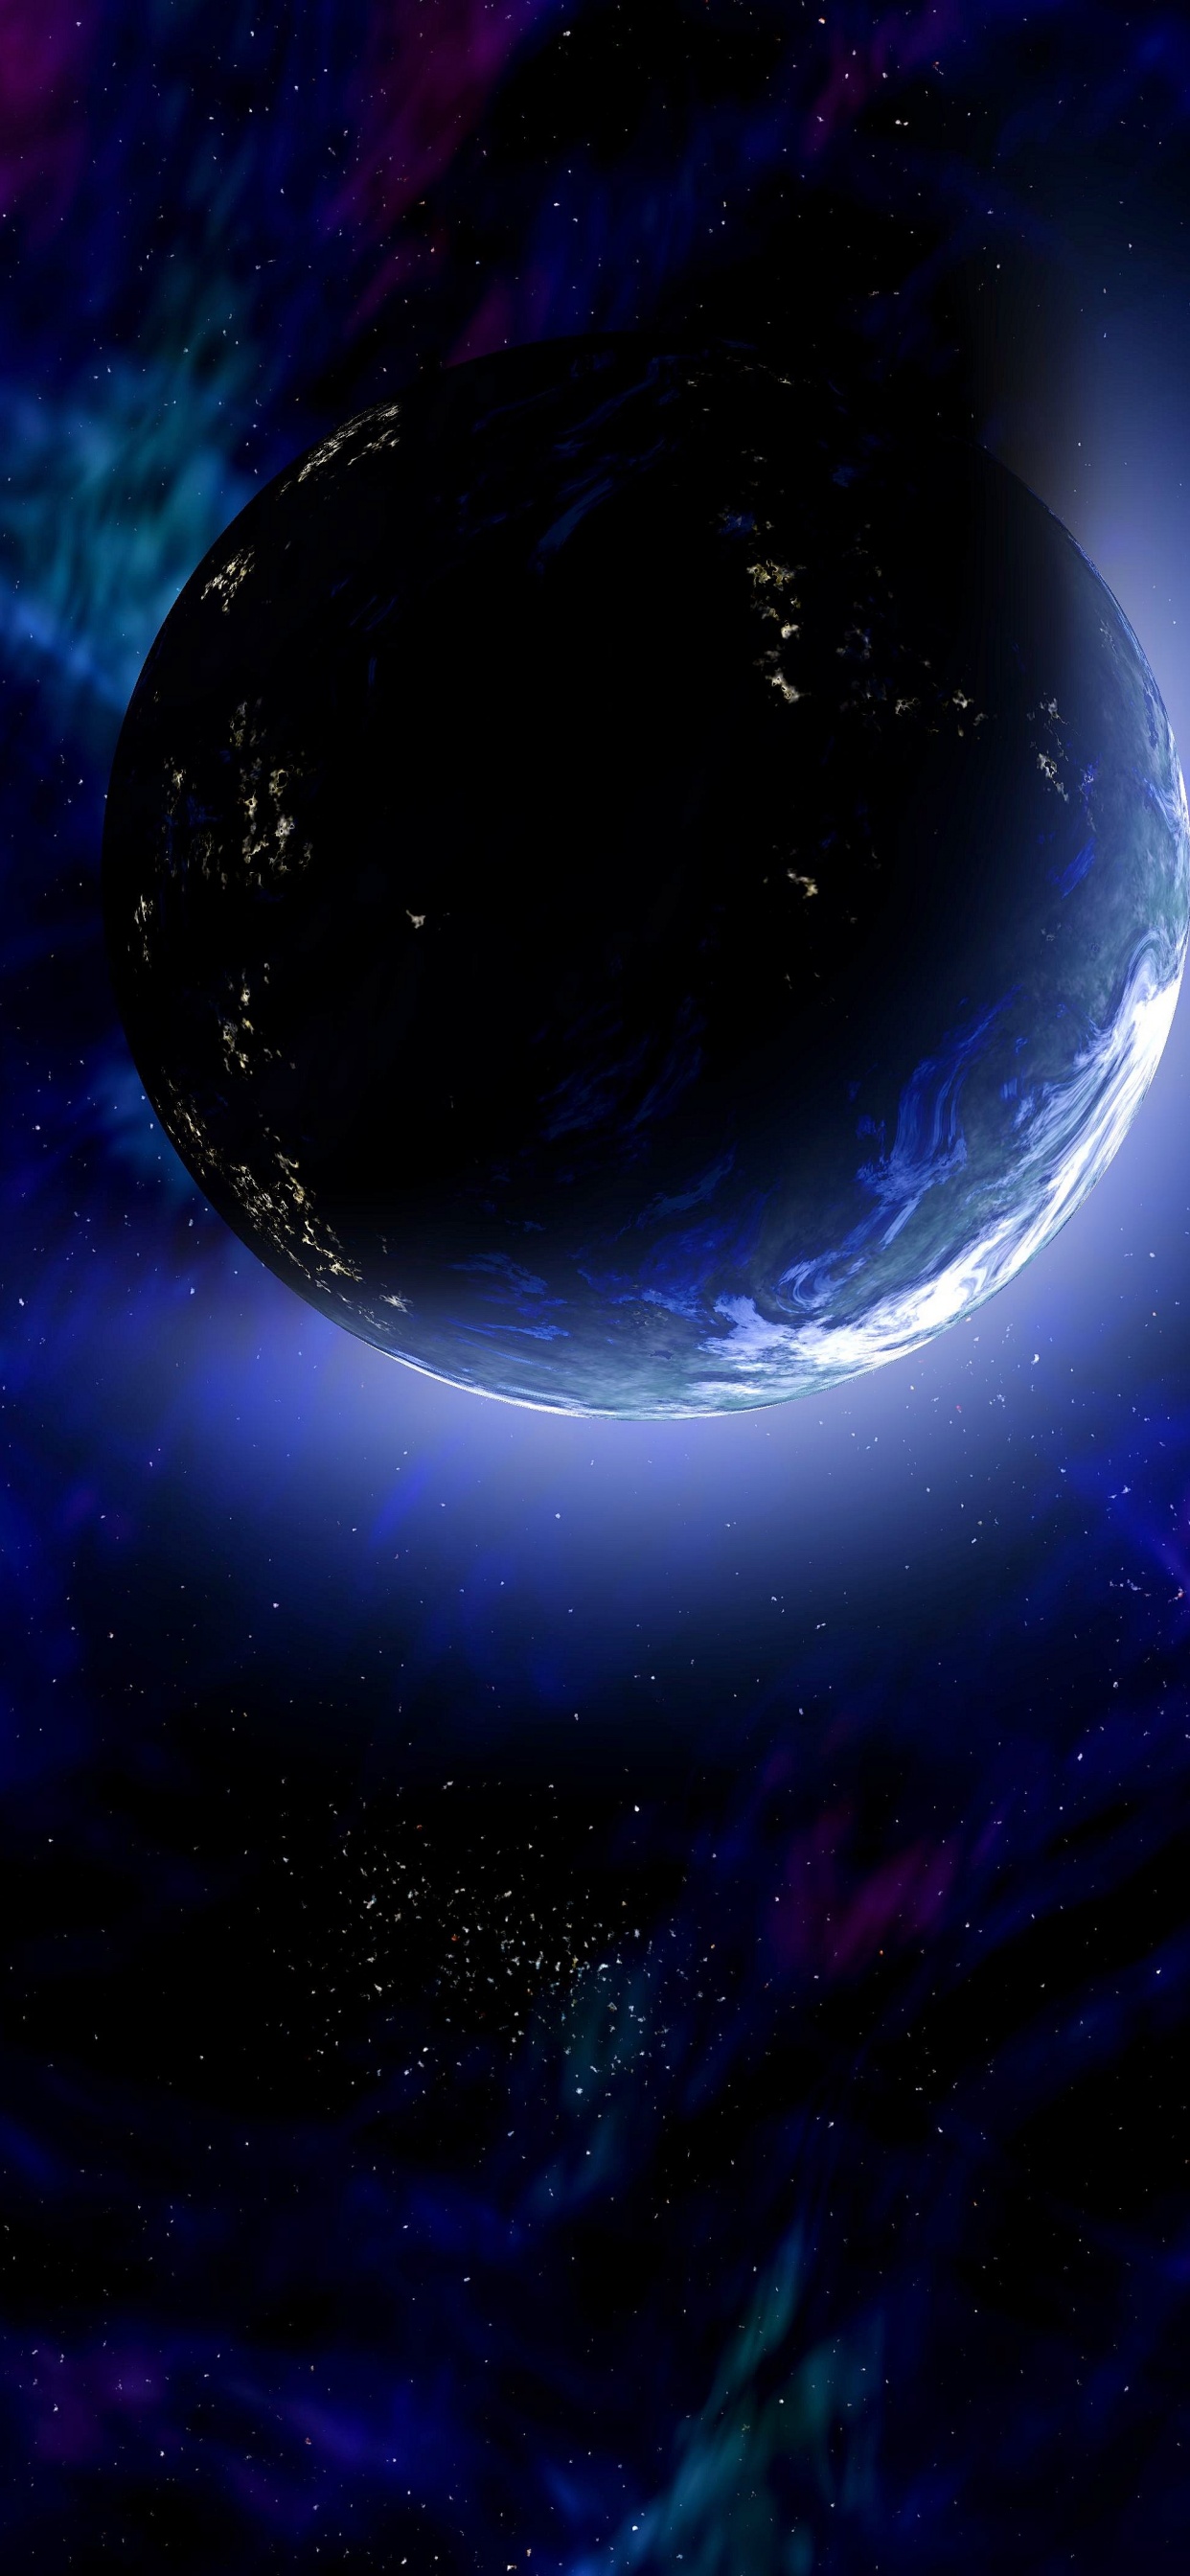 Blue and White Planet Painting. Wallpaper in 1242x2688 Resolution